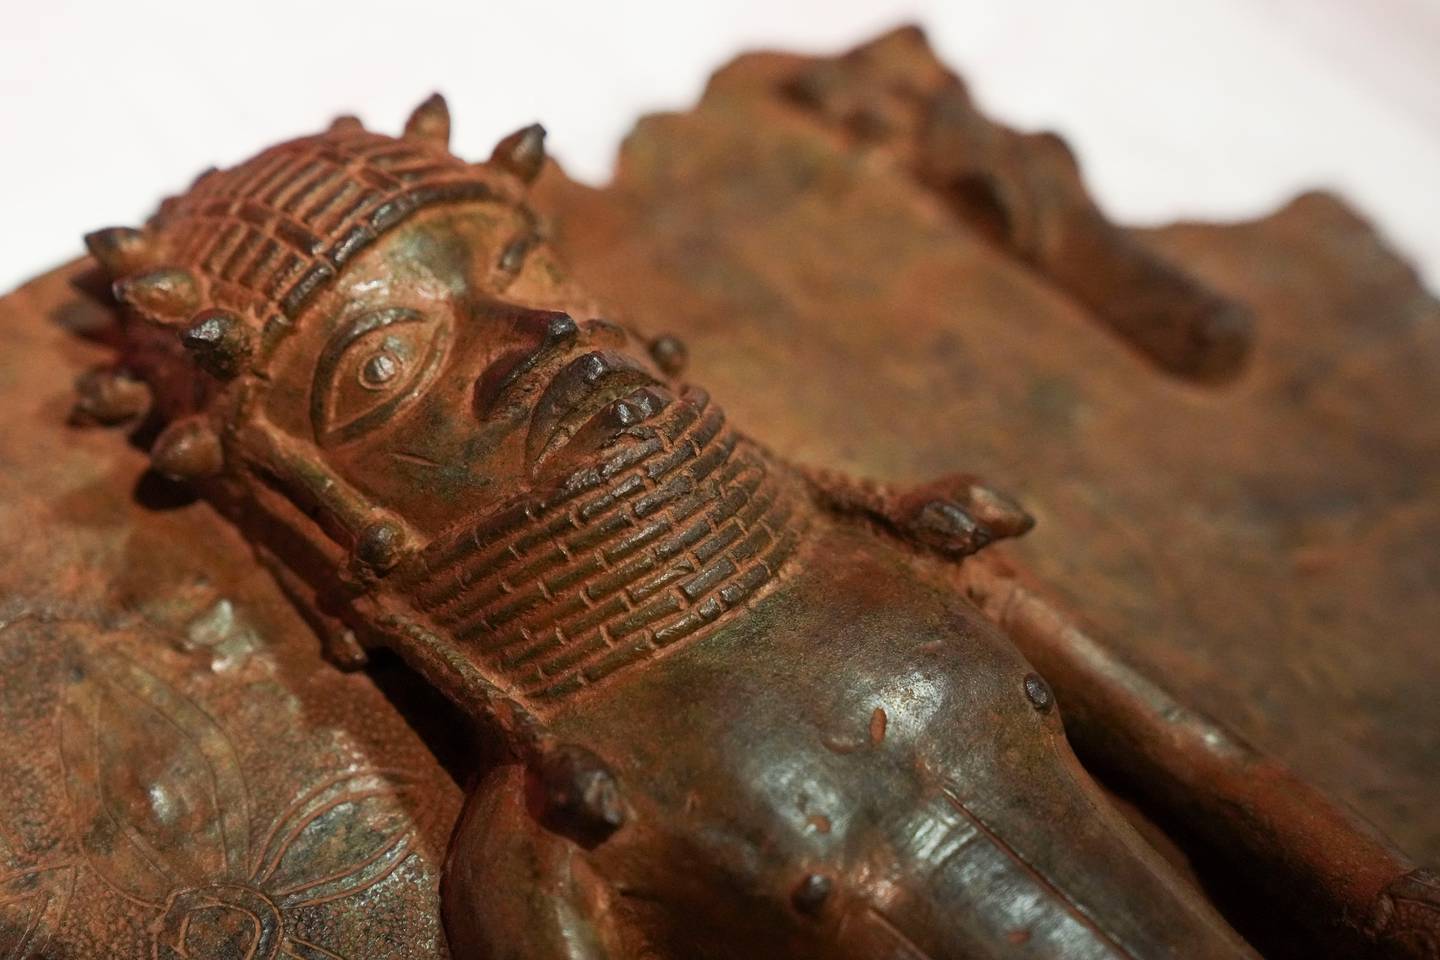 An artefact is displayed during the announcement of the return of the first six objects from World Gallery's Kingdom of Benin display to Nigeria at The Horniman Museum and Gardens, in London, Britain November 28, 2022. Reuters